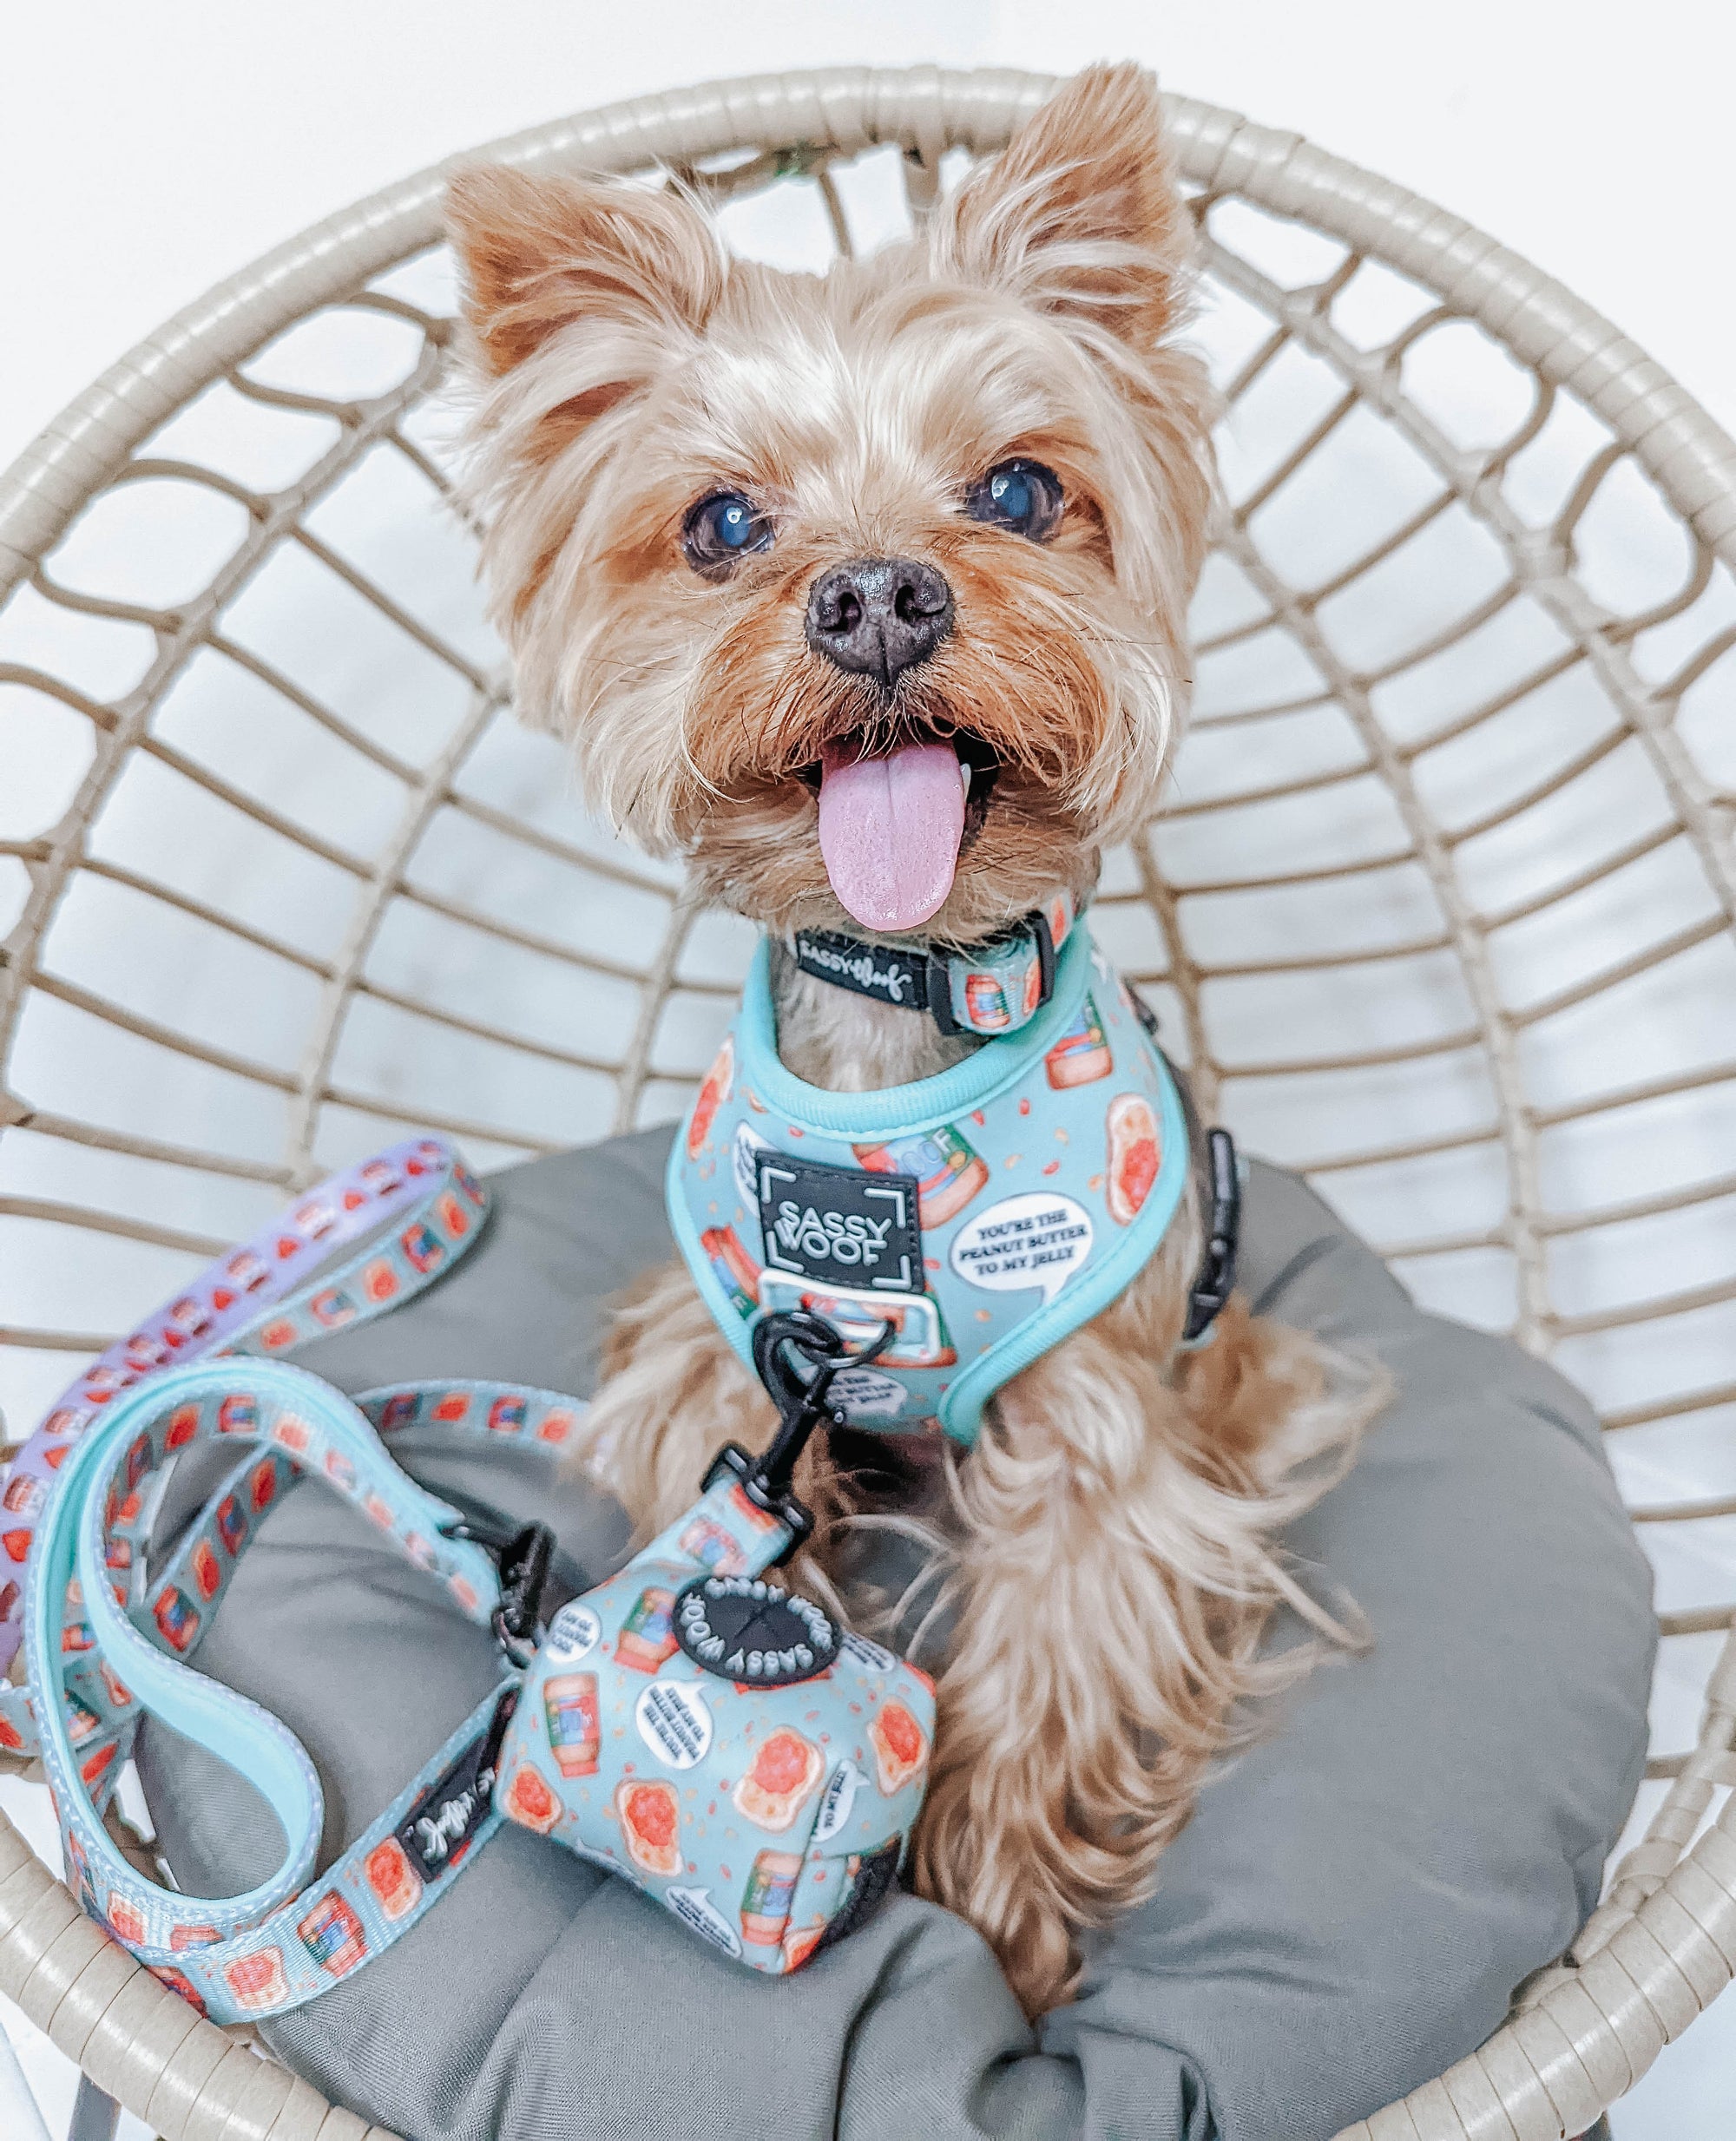 INFLUENCER_CONTENT | @OLIVER_THEYORKIE | SIZE S